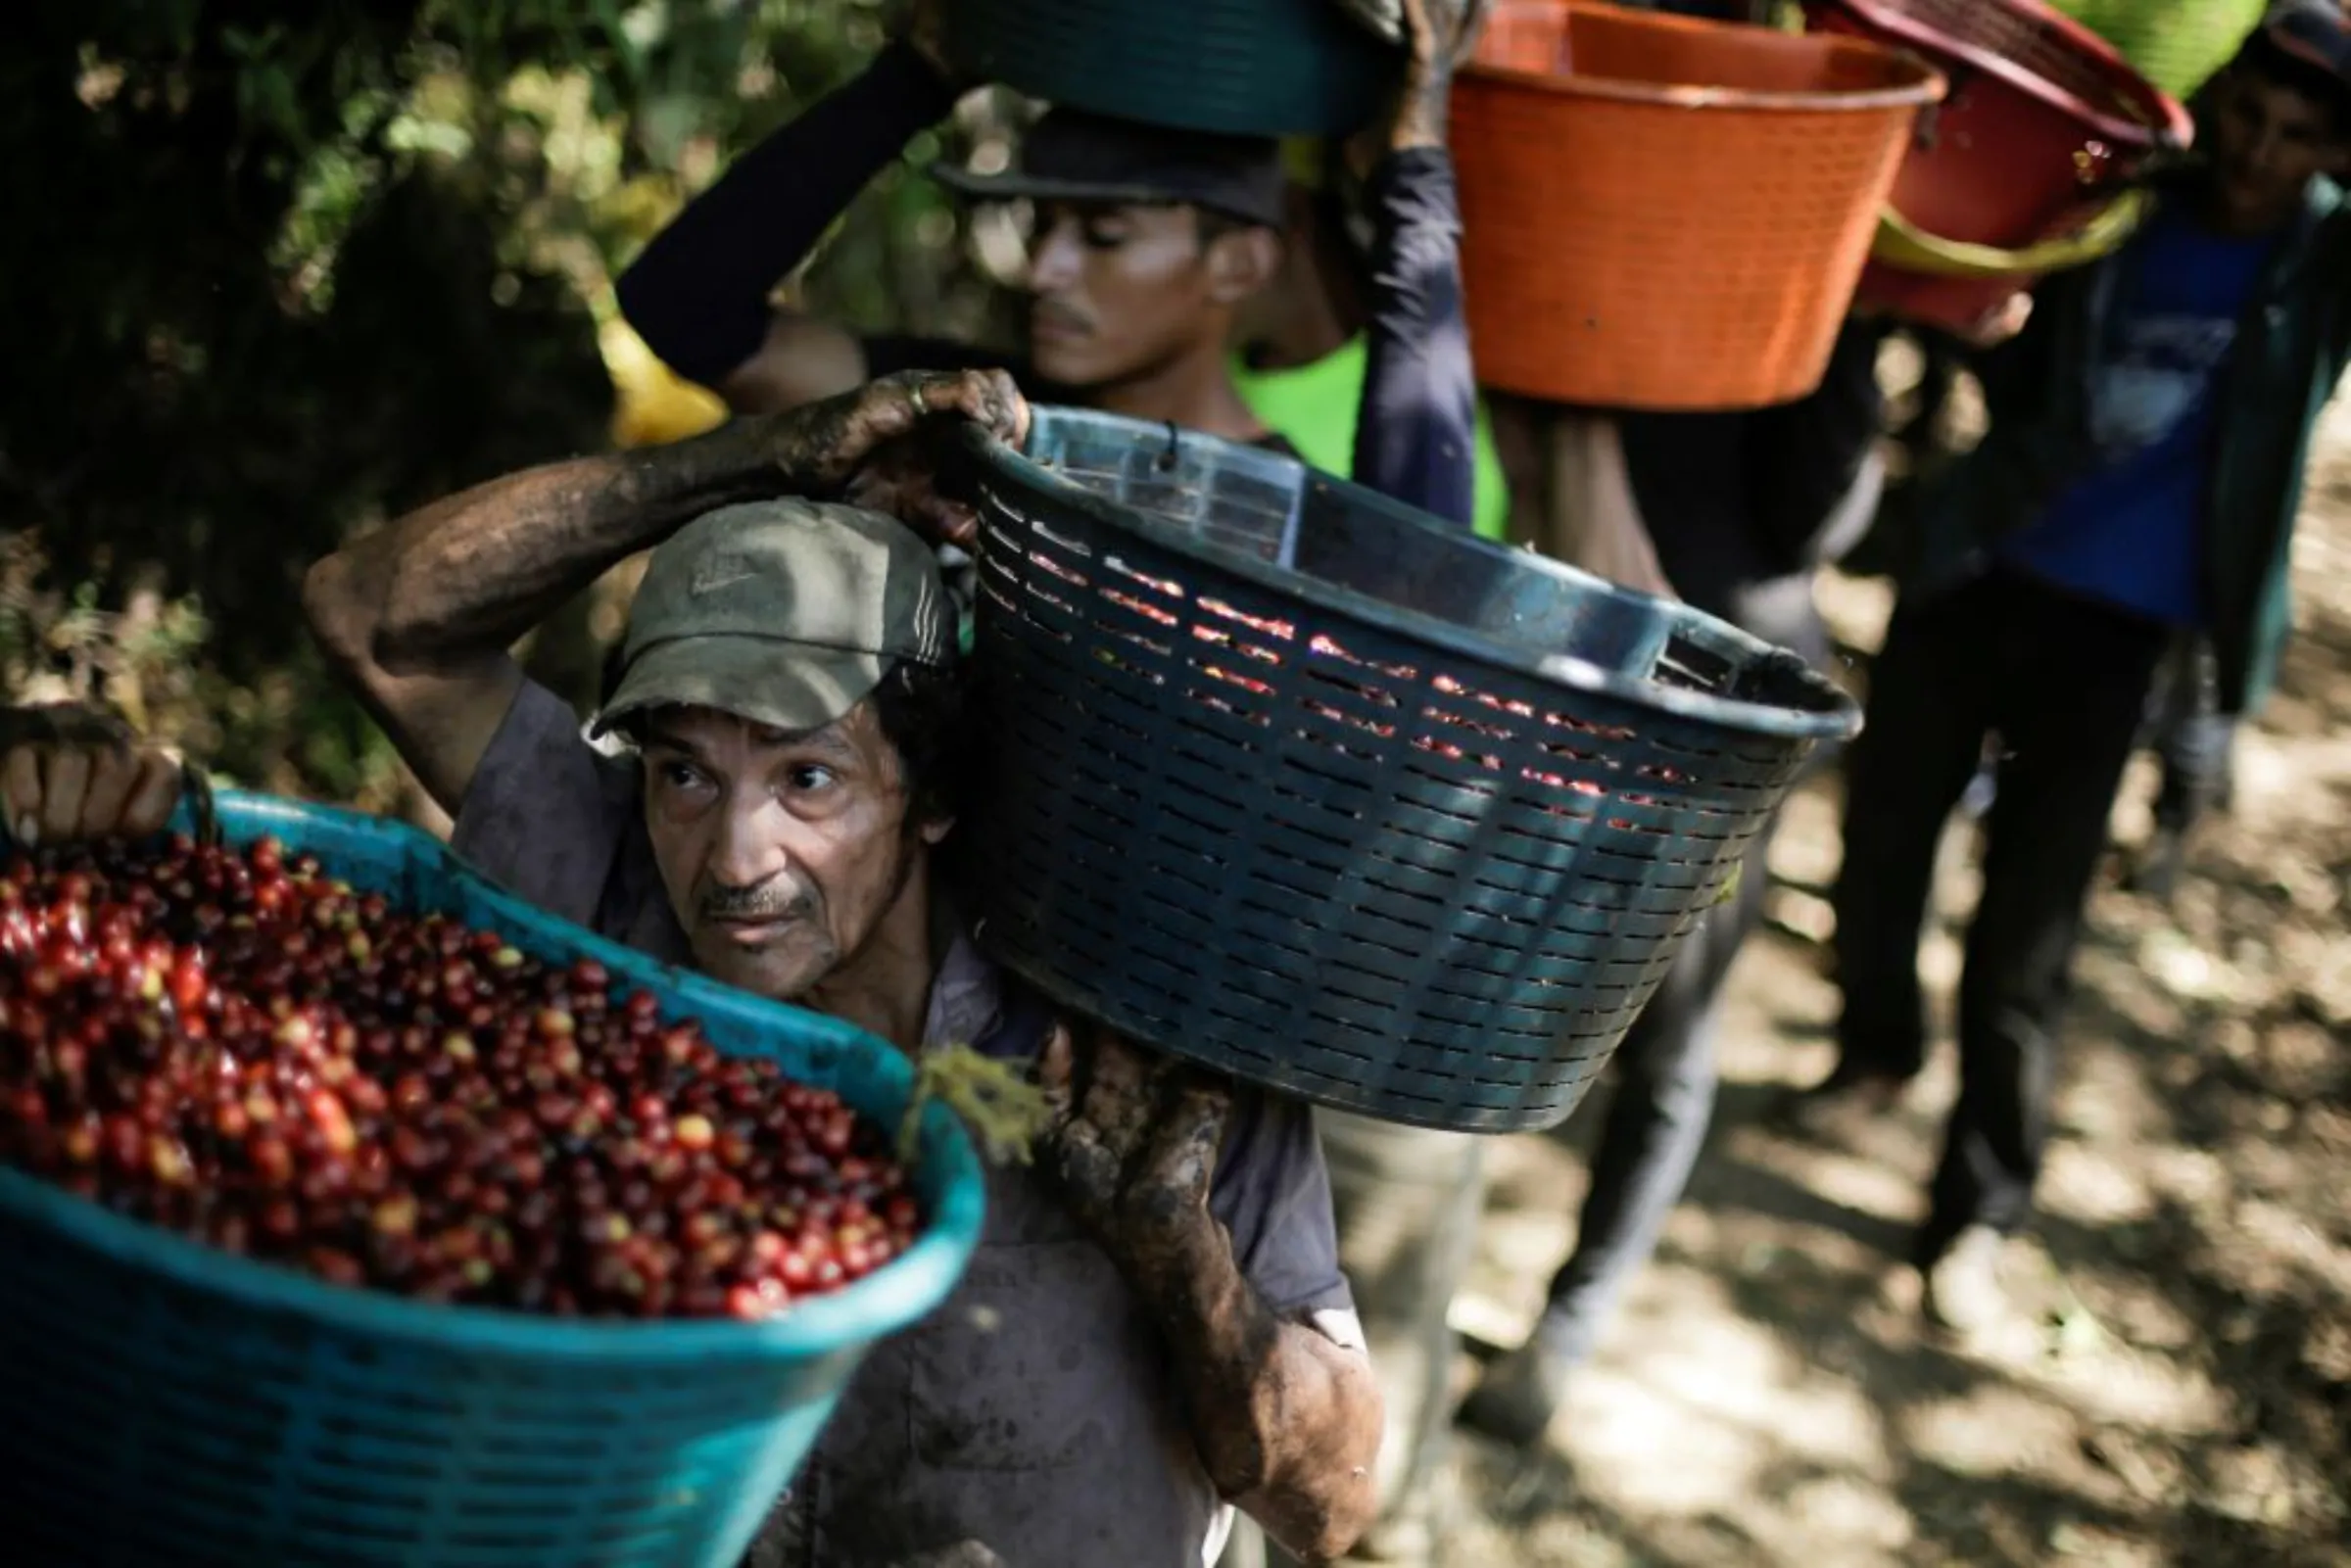 Workers wait in a line for their baskets of freshly harvested coffee cherries to be measured at a coffee plantation, in Grecia, Costa Rica January 9, 2020